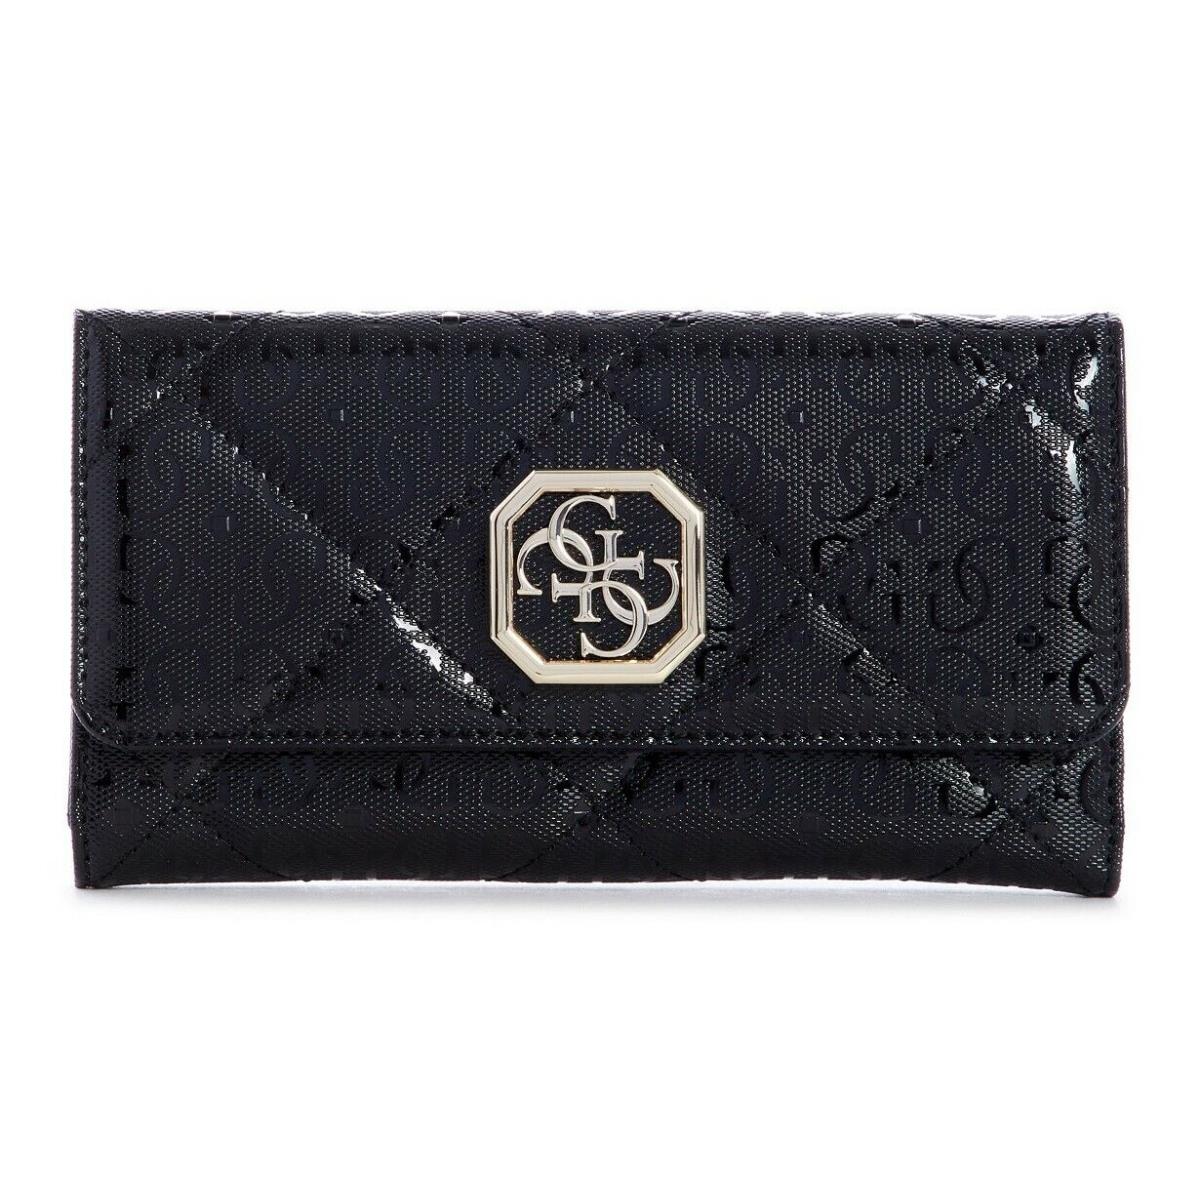 Guess Women`s Dilla Black Glossy Patent Shine Quilted Large Organizer Wallet